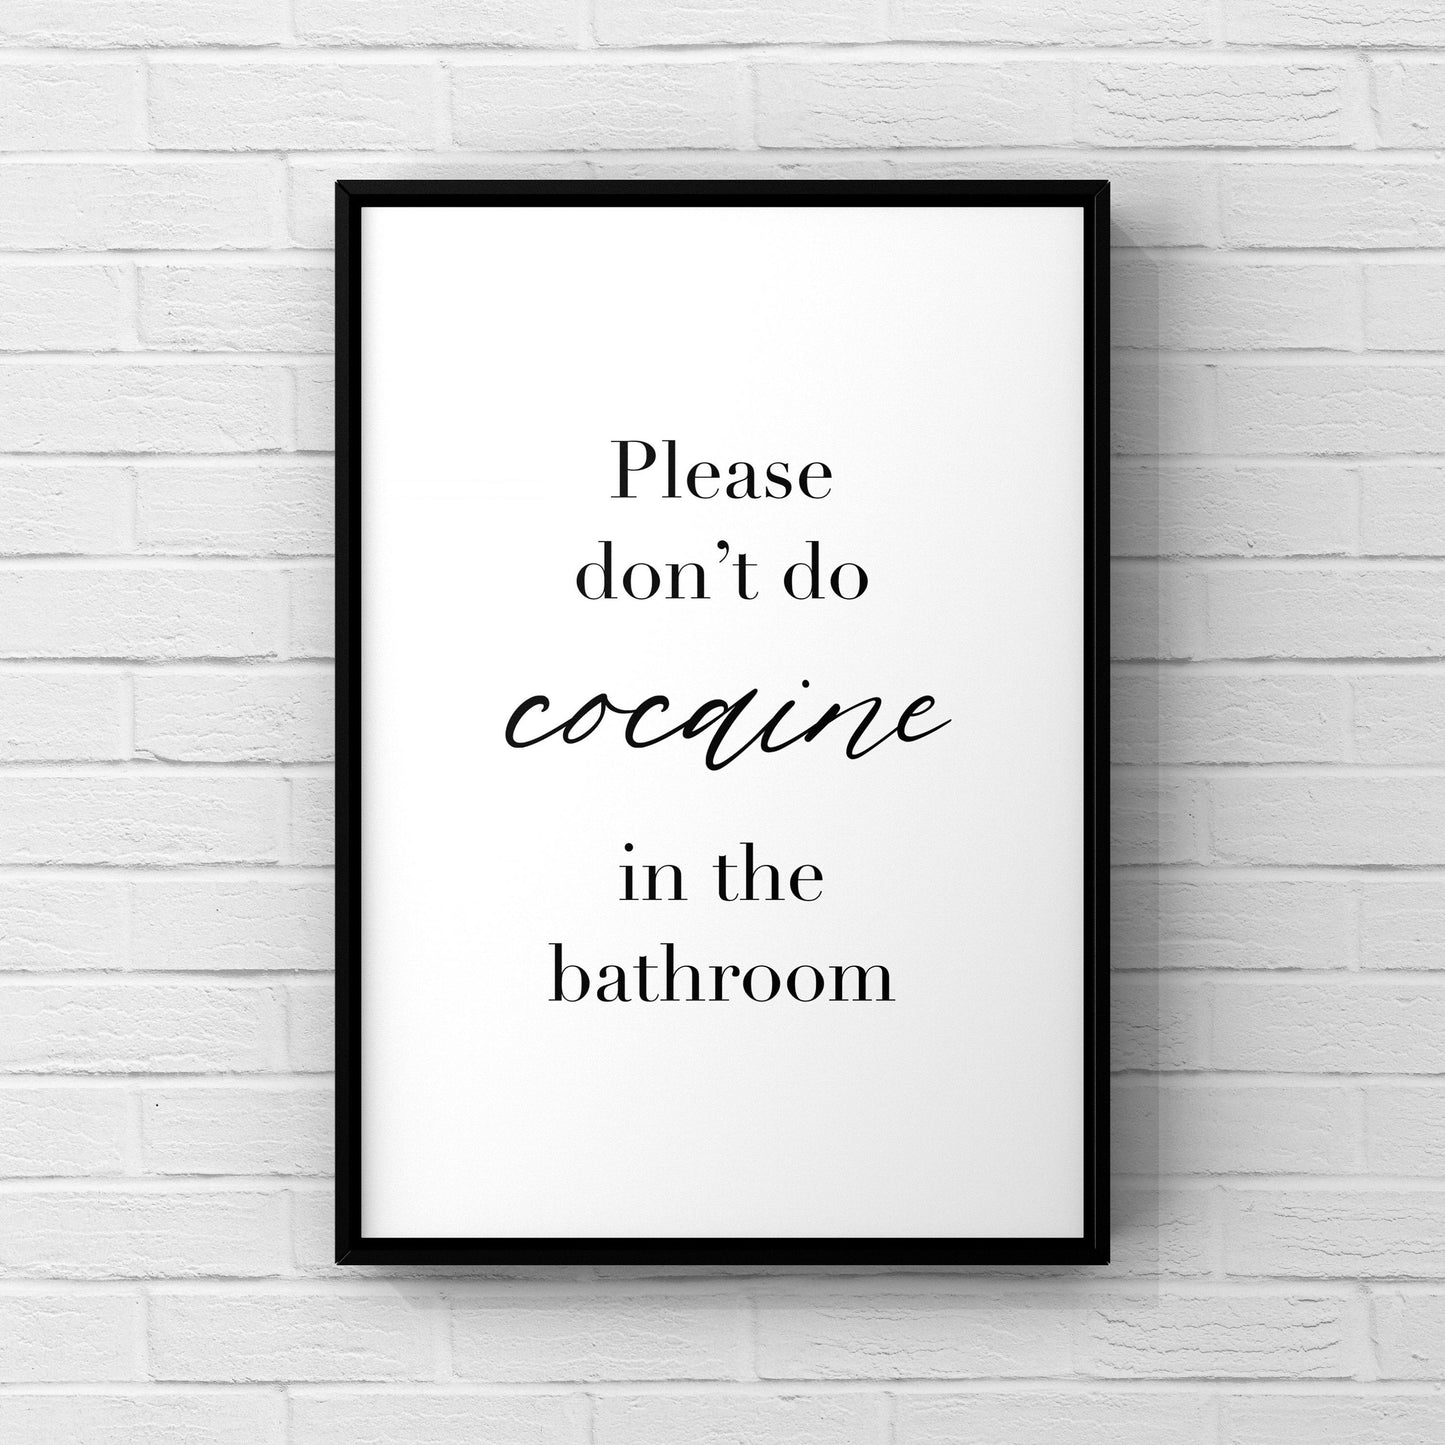 Please don’t do cocaine in the bathroom